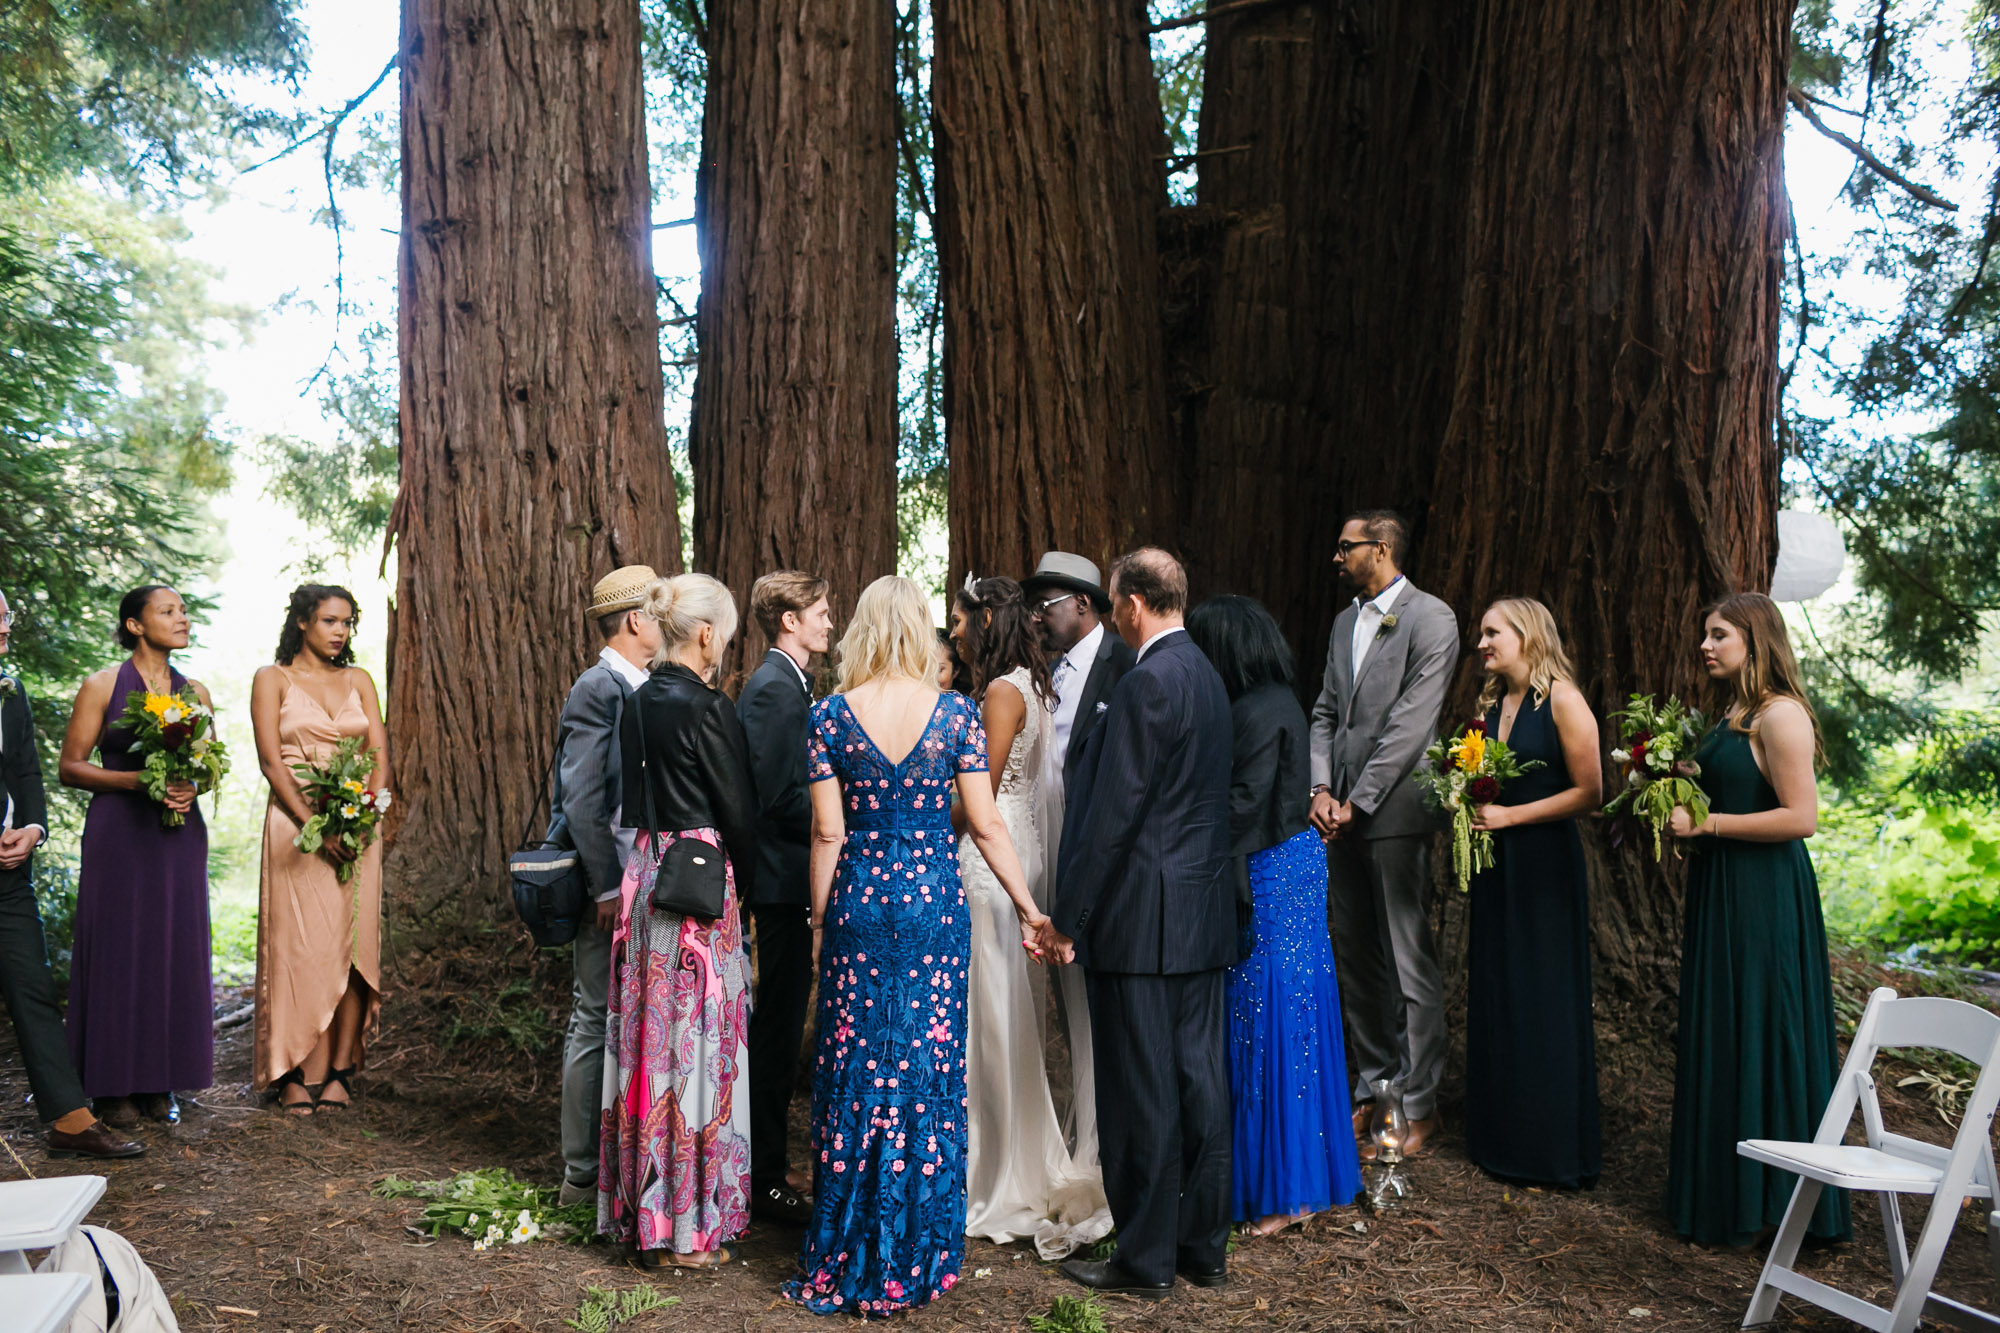 Family surround wedding couple during ceremony in a redwood grove